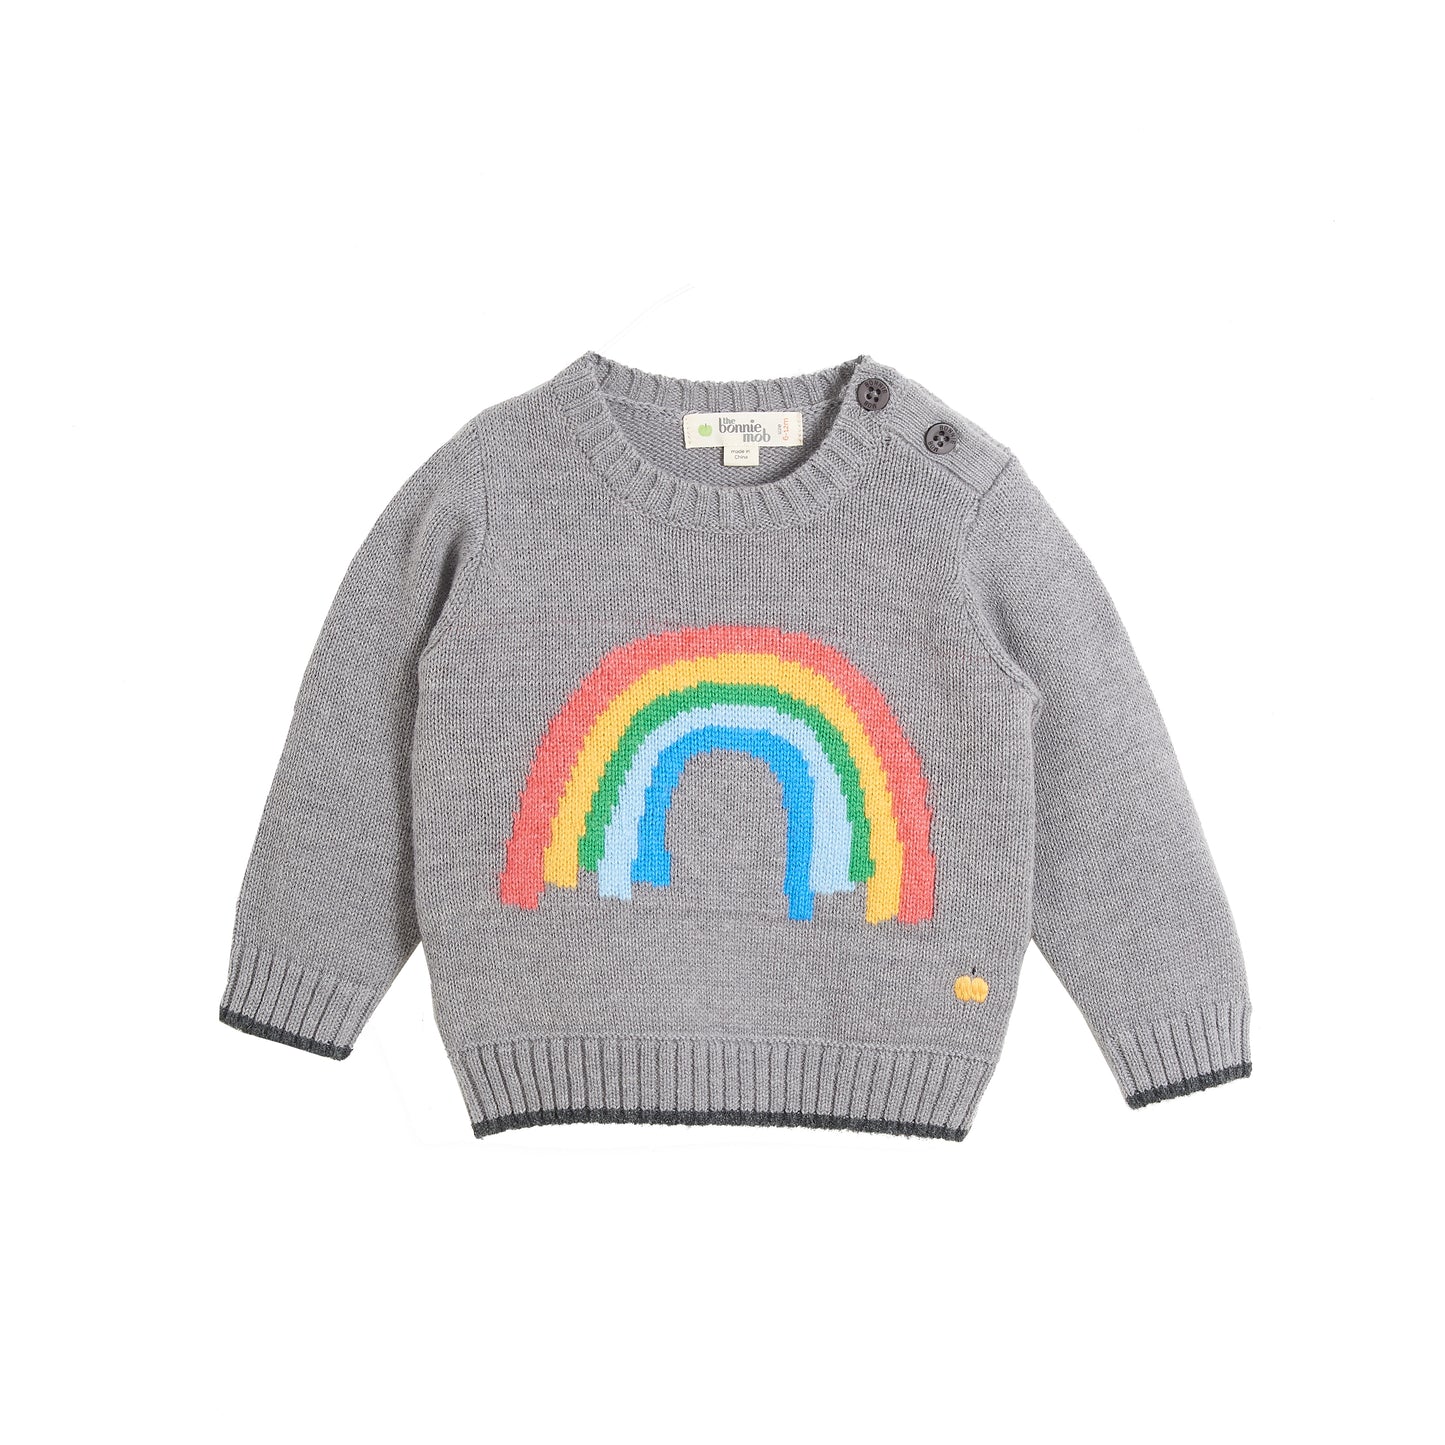 SWEATER - BABY - 2 COLOR (GREY/SAND) - HAPPY